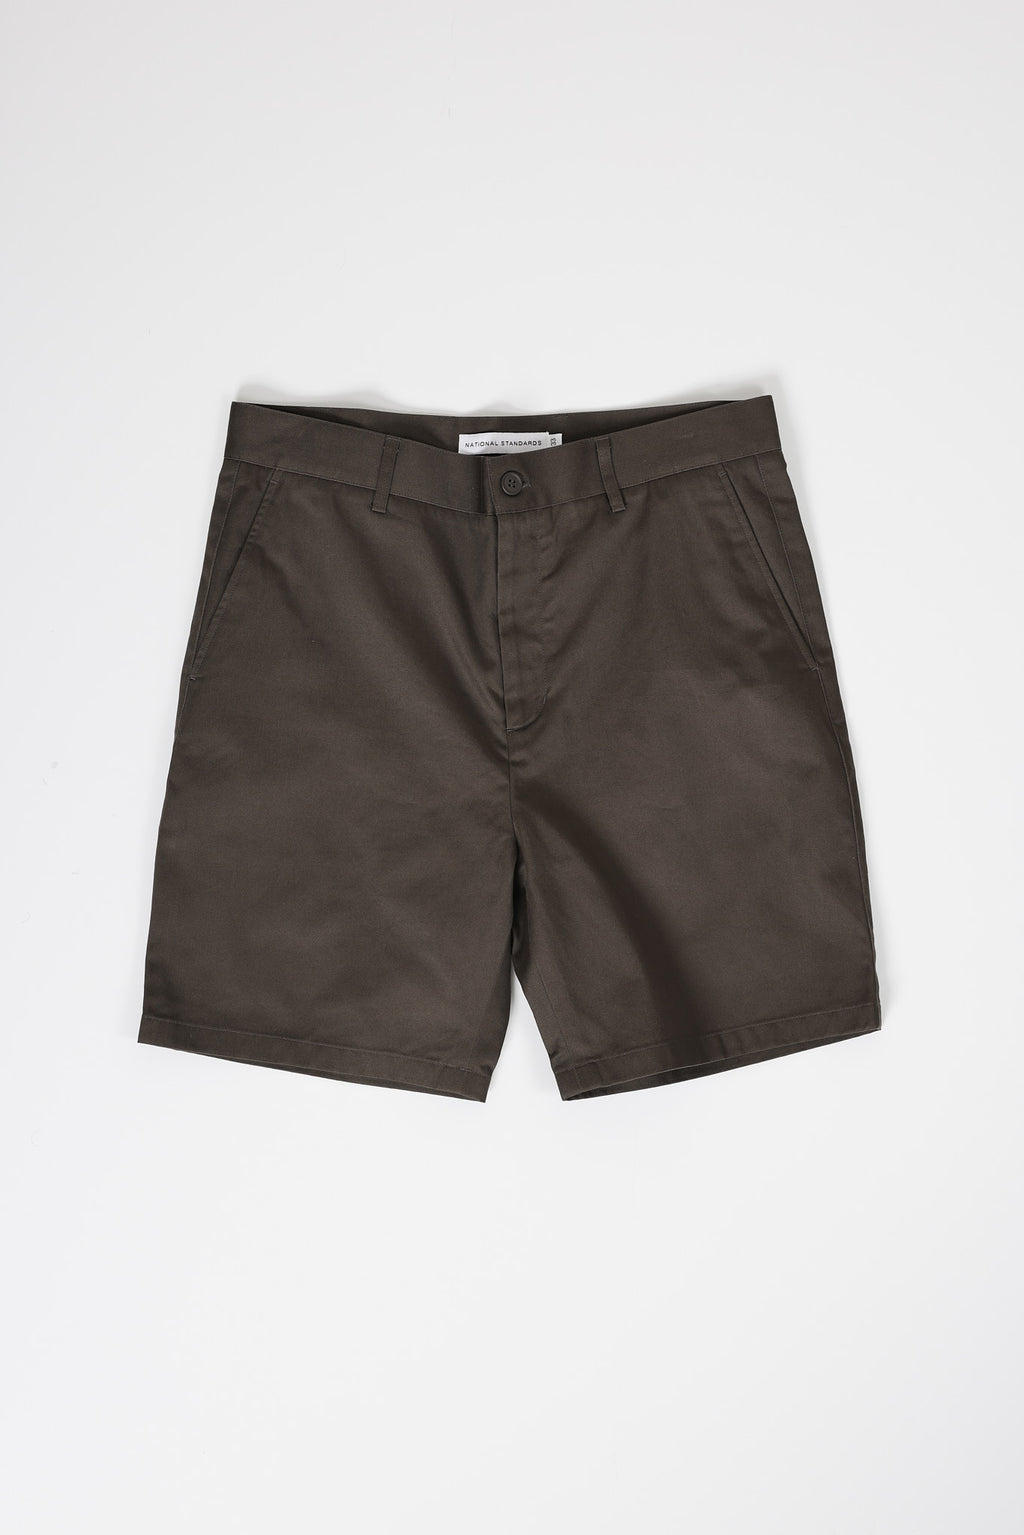 Japanese Chino Shorts High Density Twill in Charcoal 01